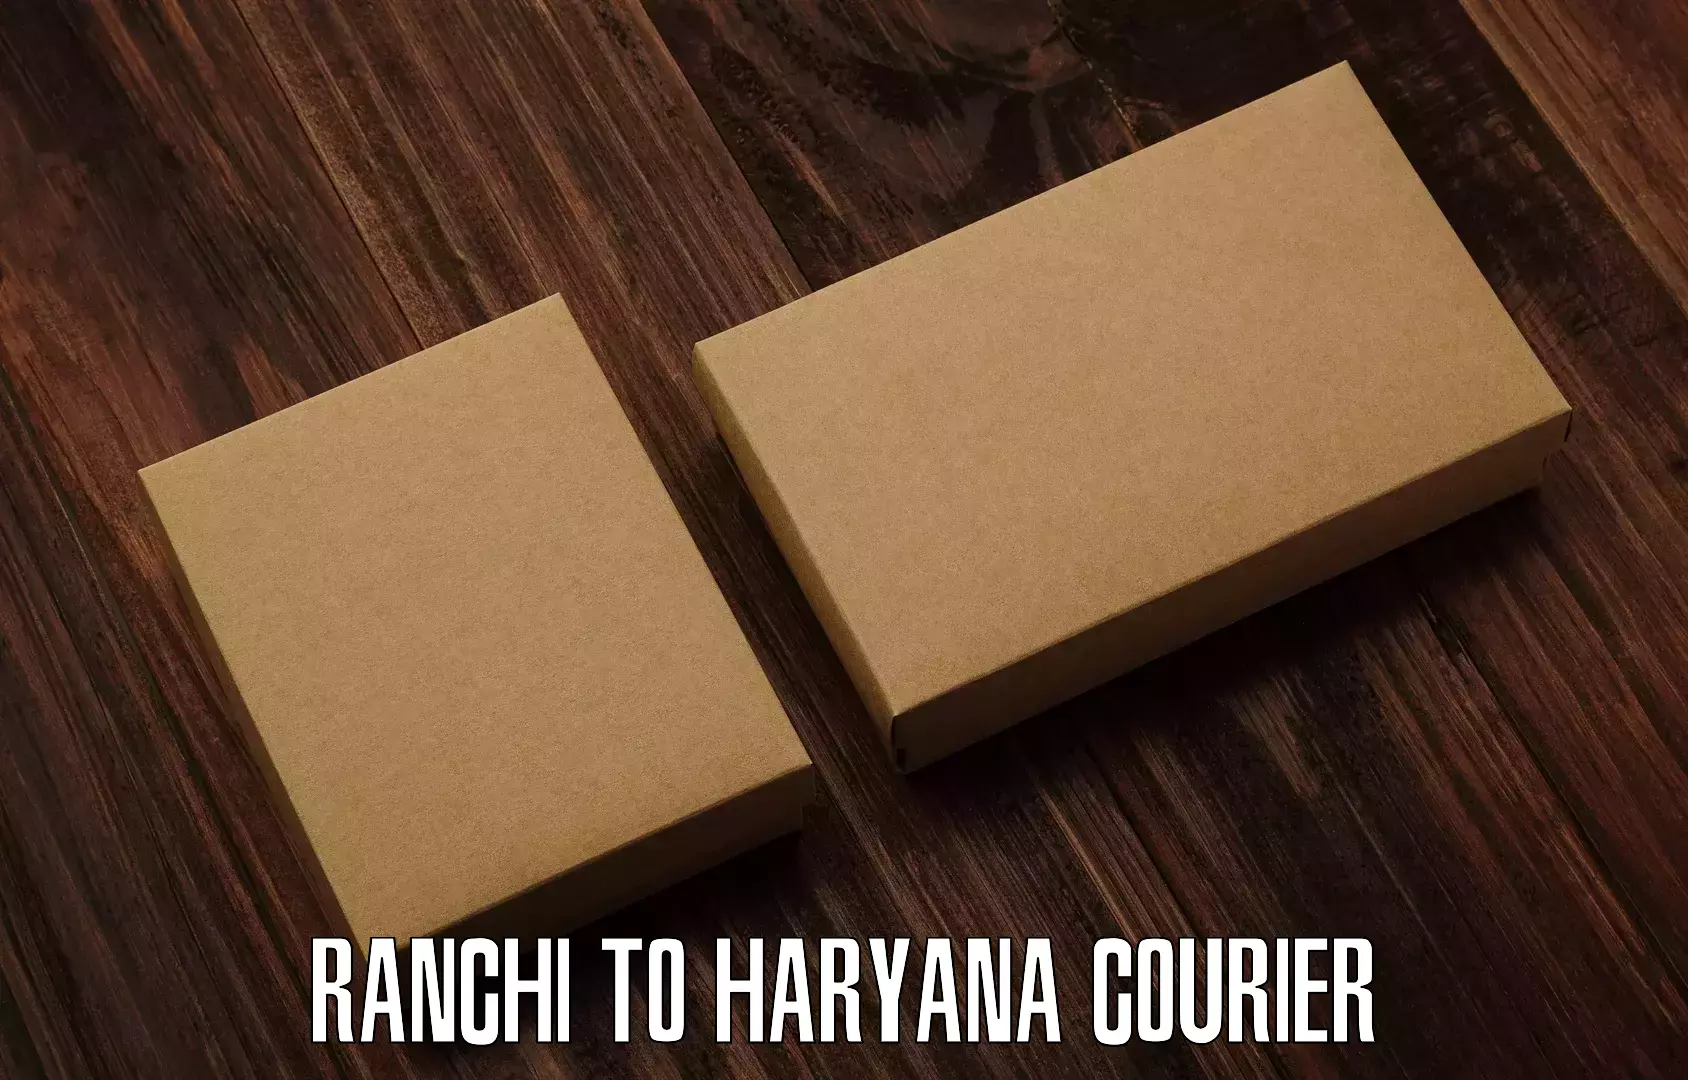 Reliable delivery network Ranchi to Haryana